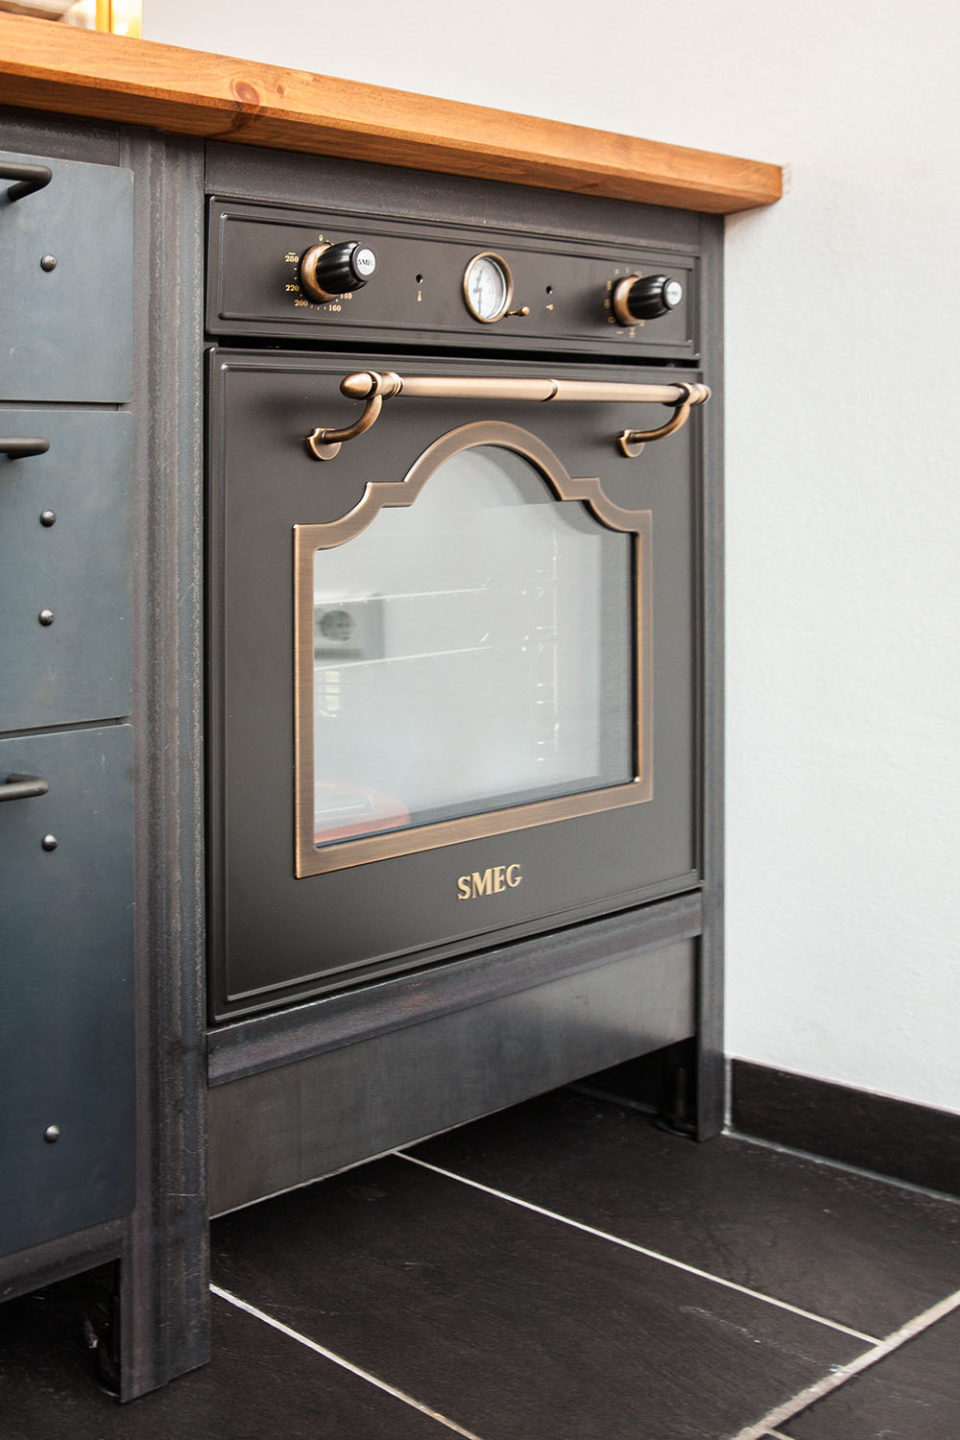 Smeg oven in an industrial kitchen